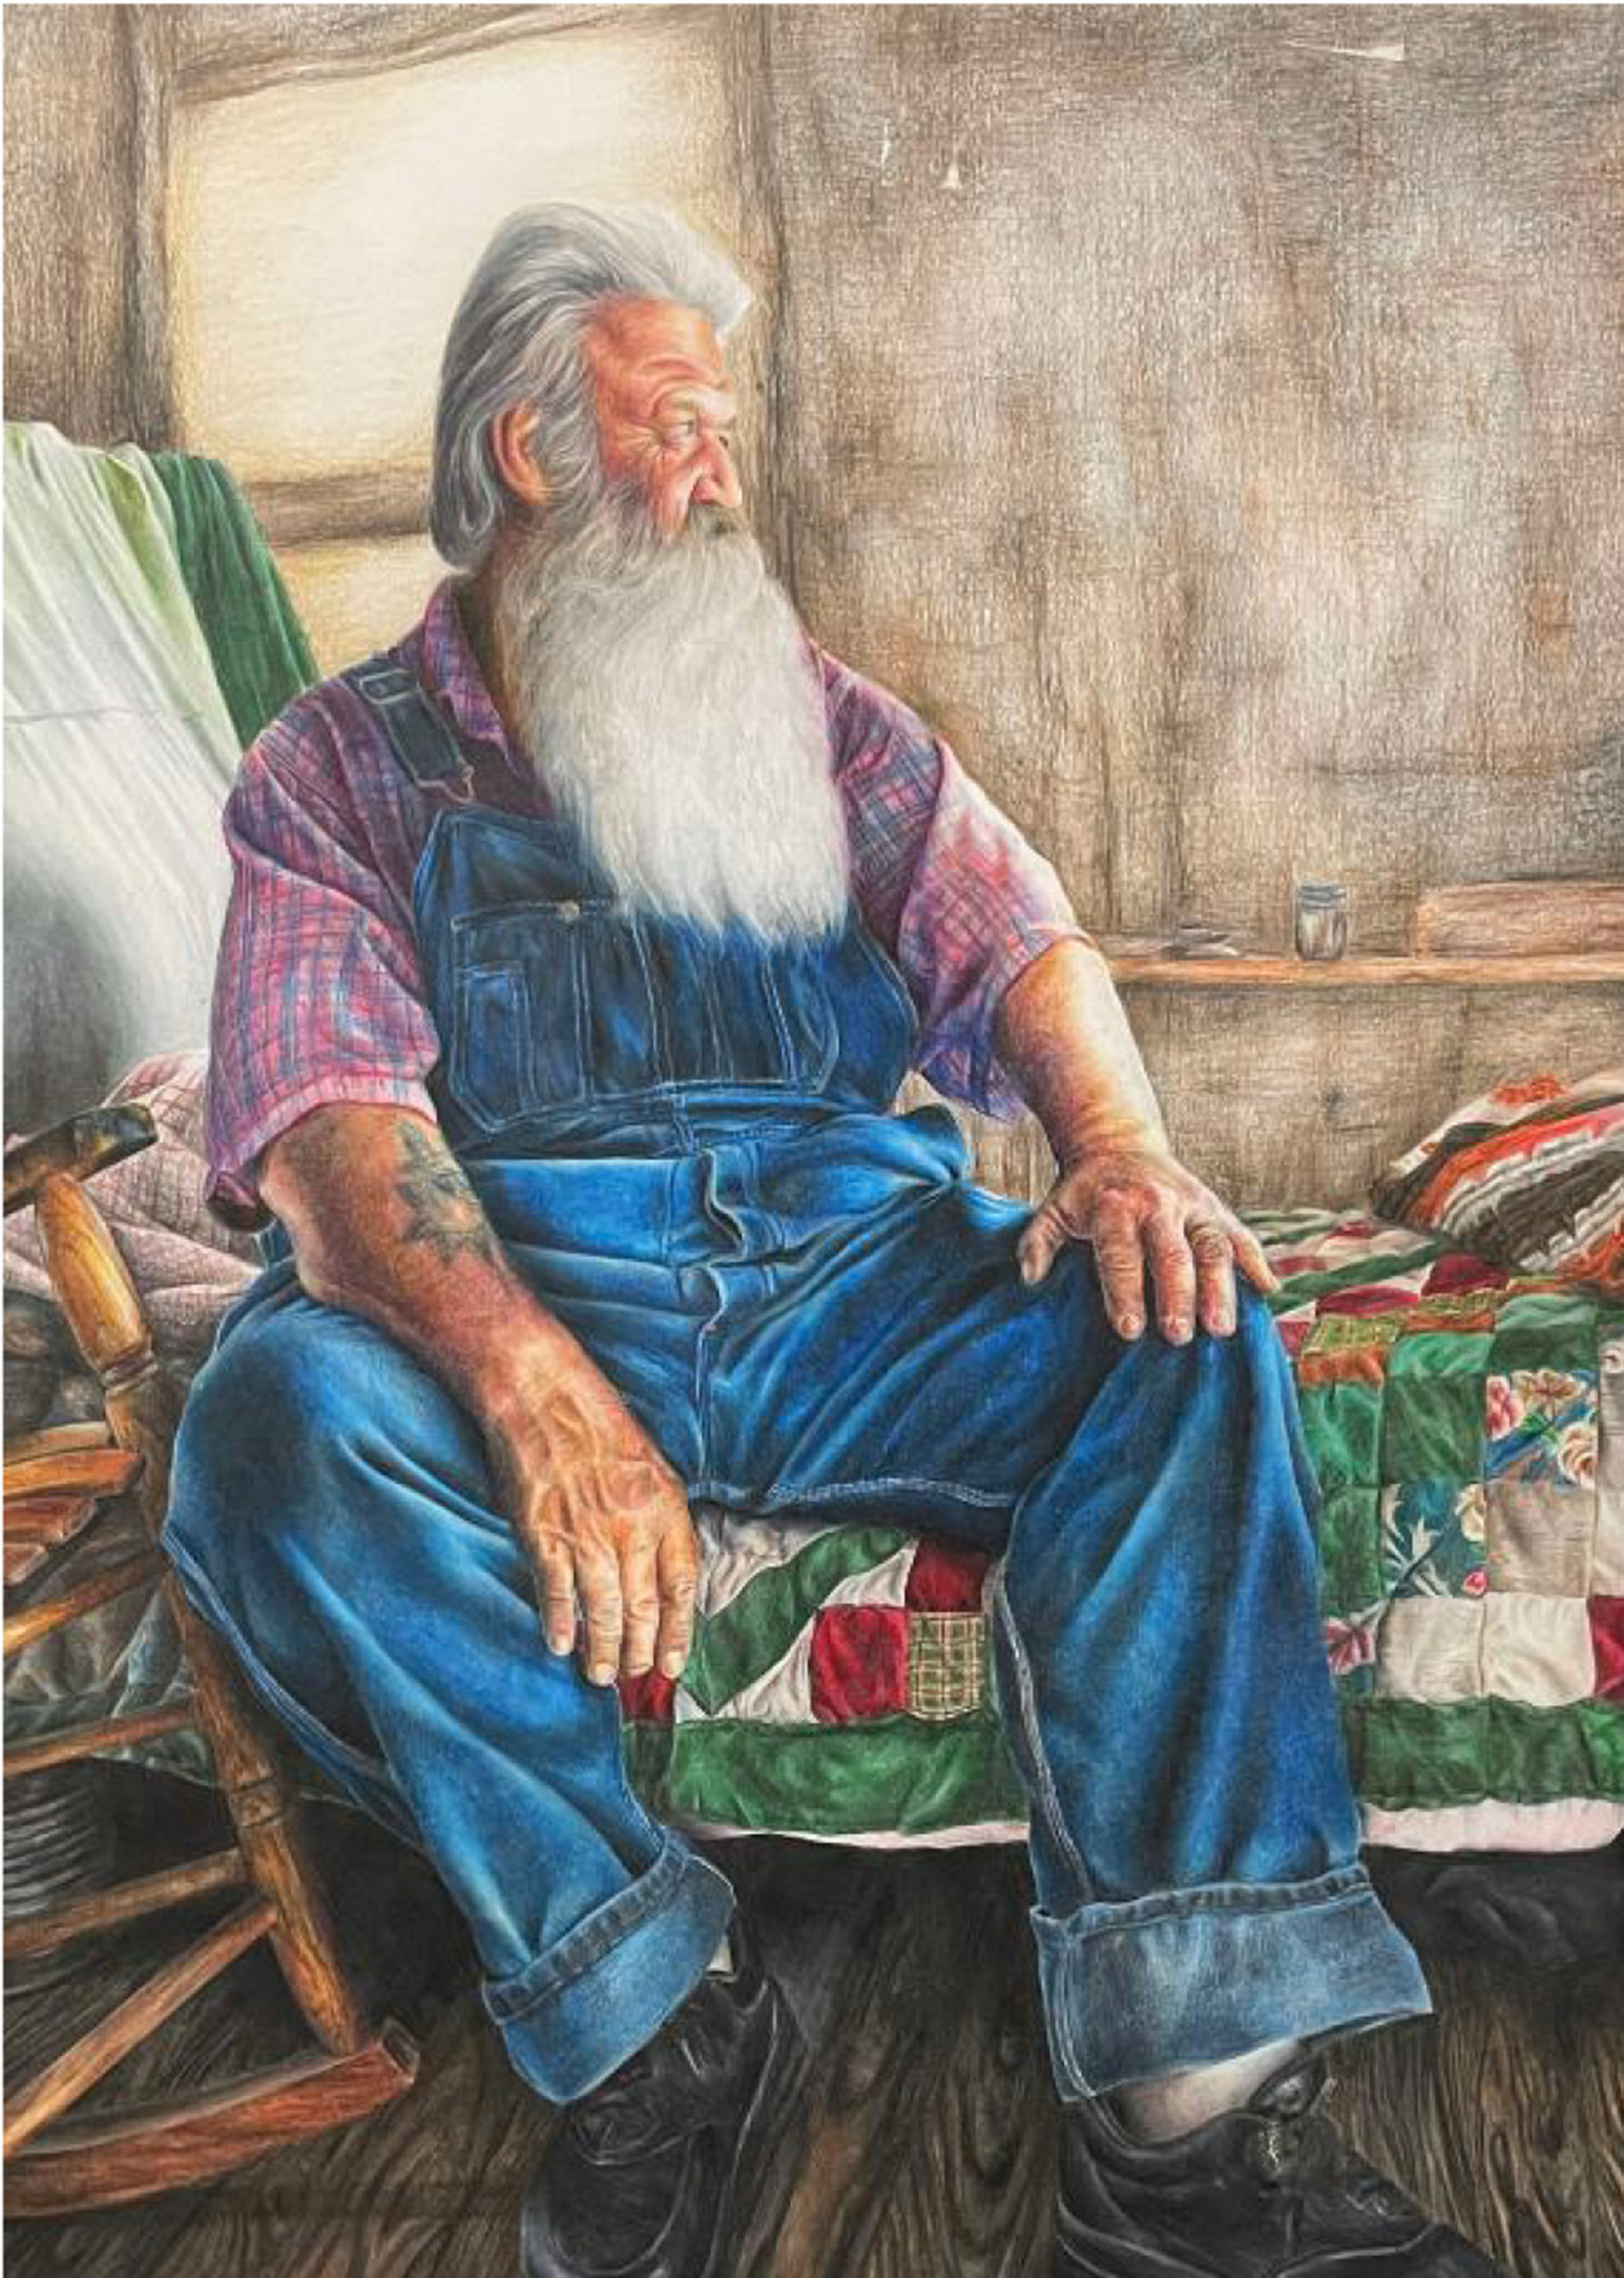 Illustrated of an old bearded man in overalls